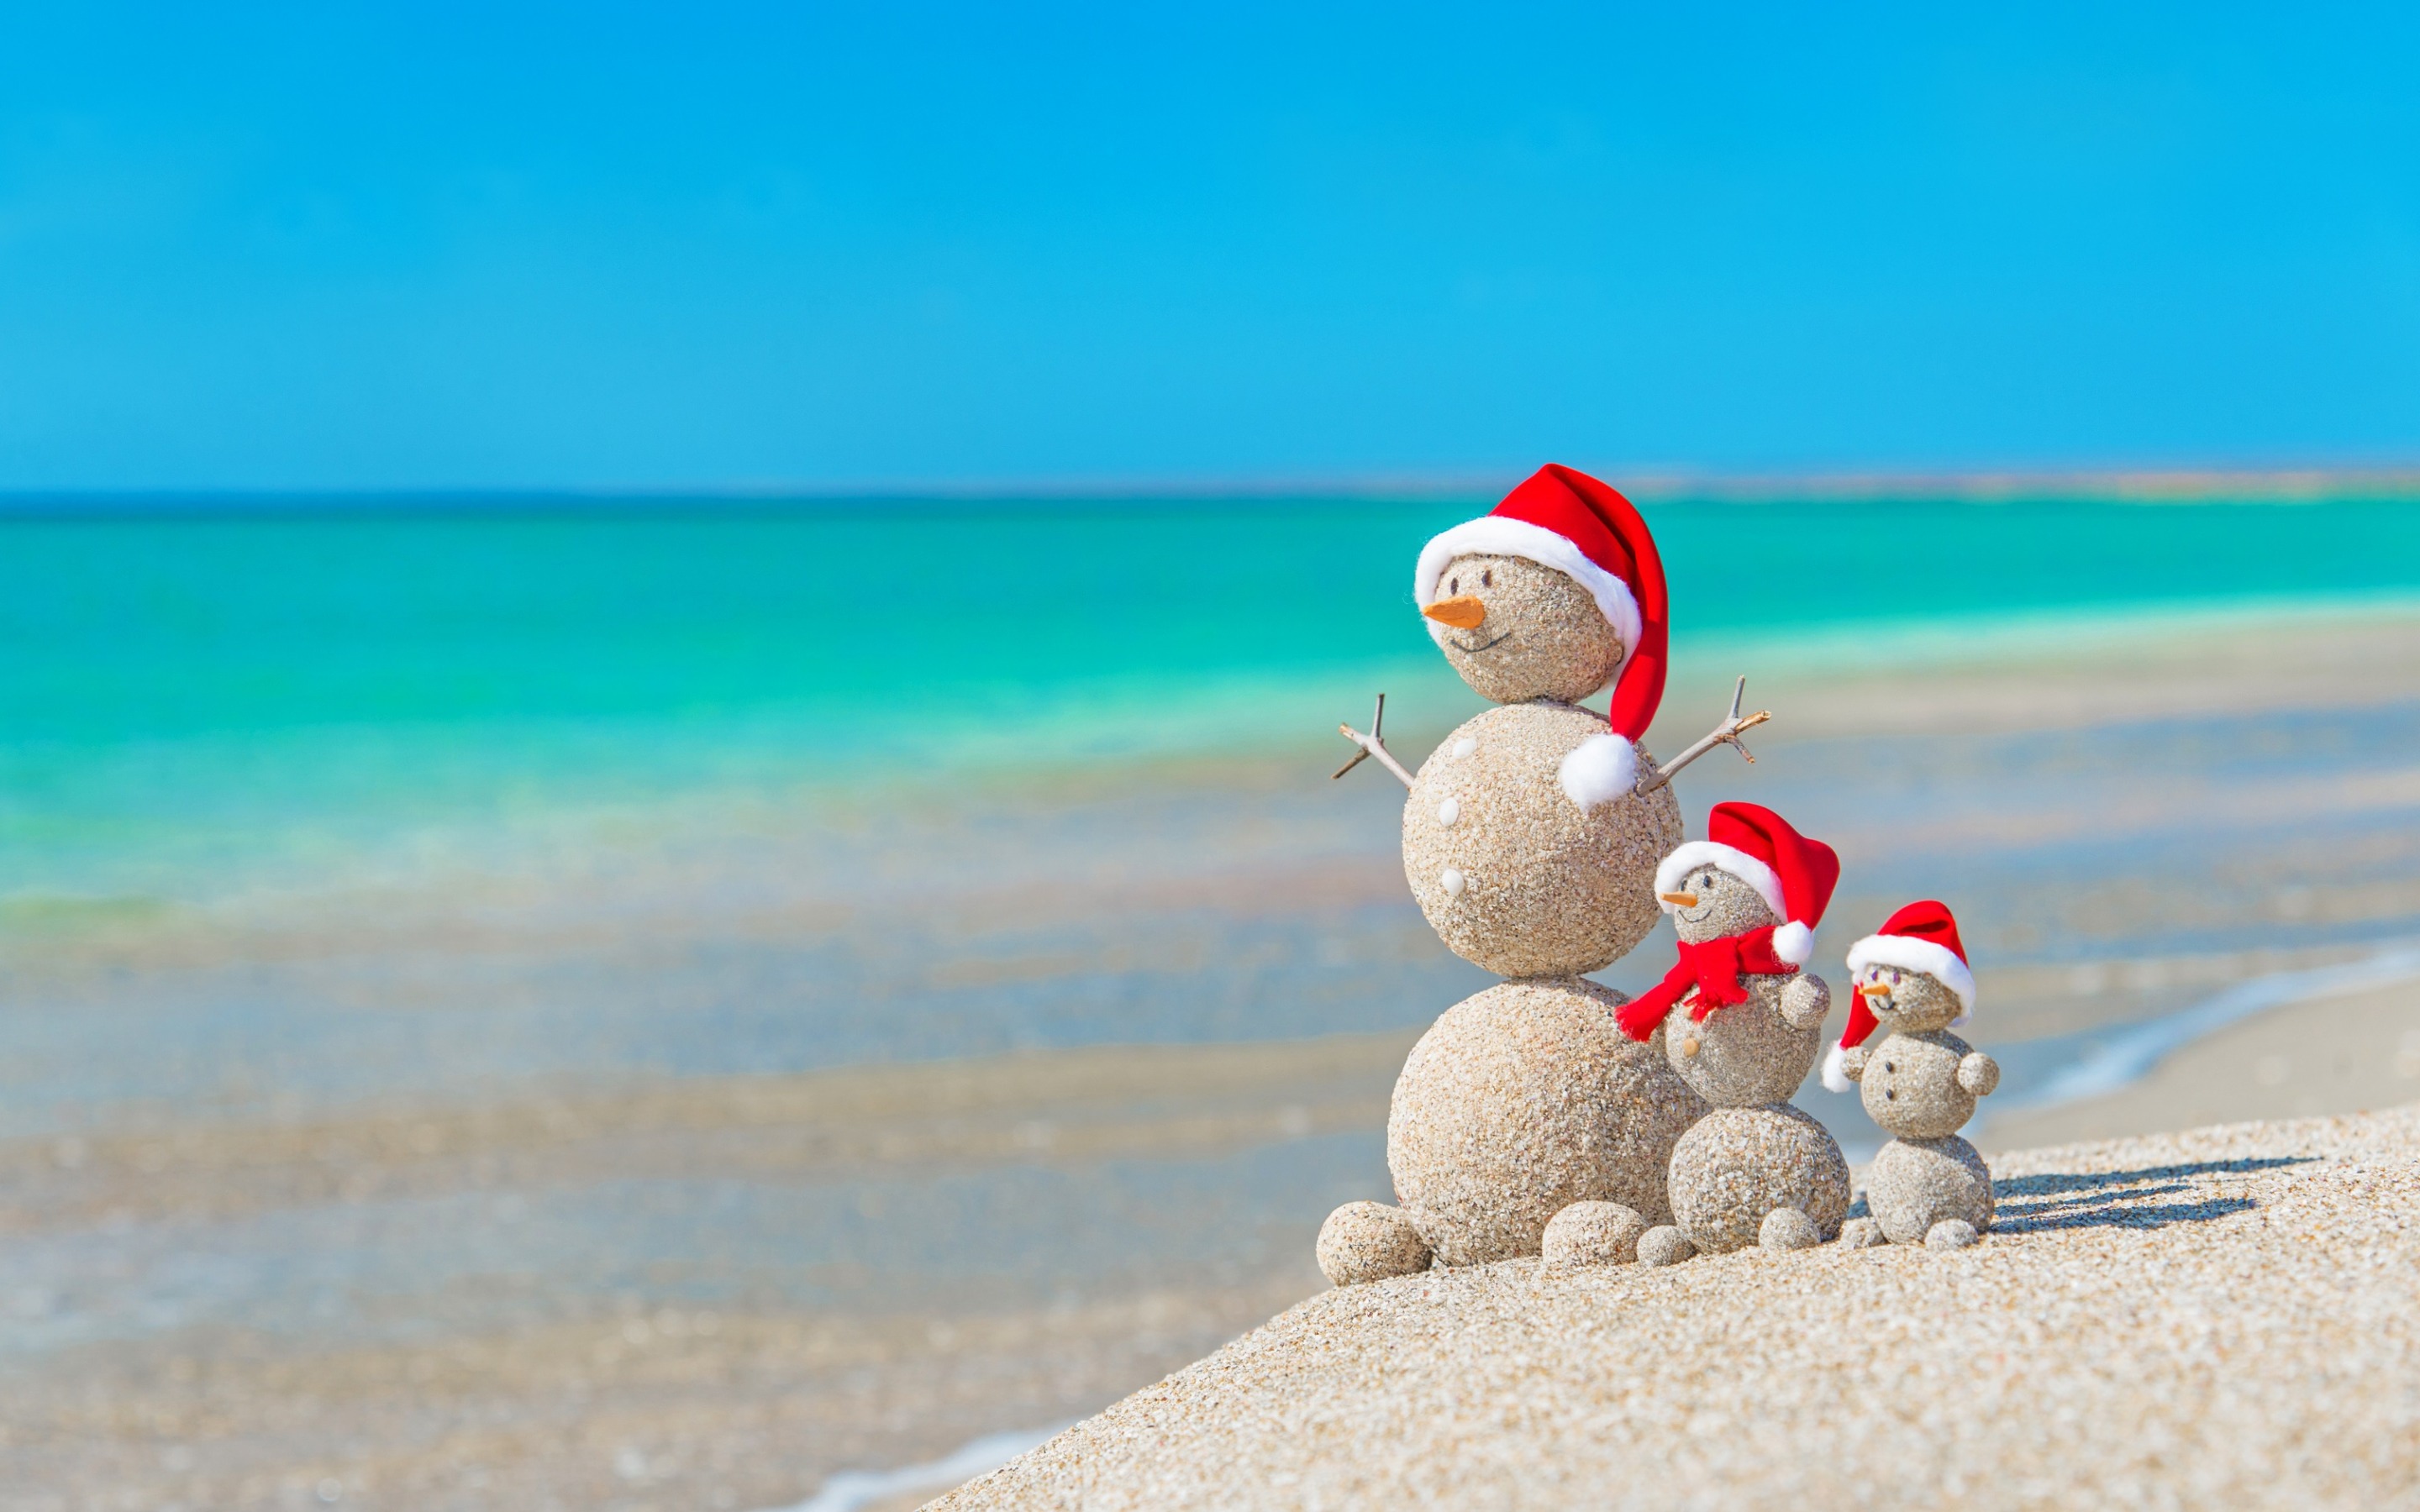 Download wallpapers Christmas, tropical islands, beach, snowmen from ...